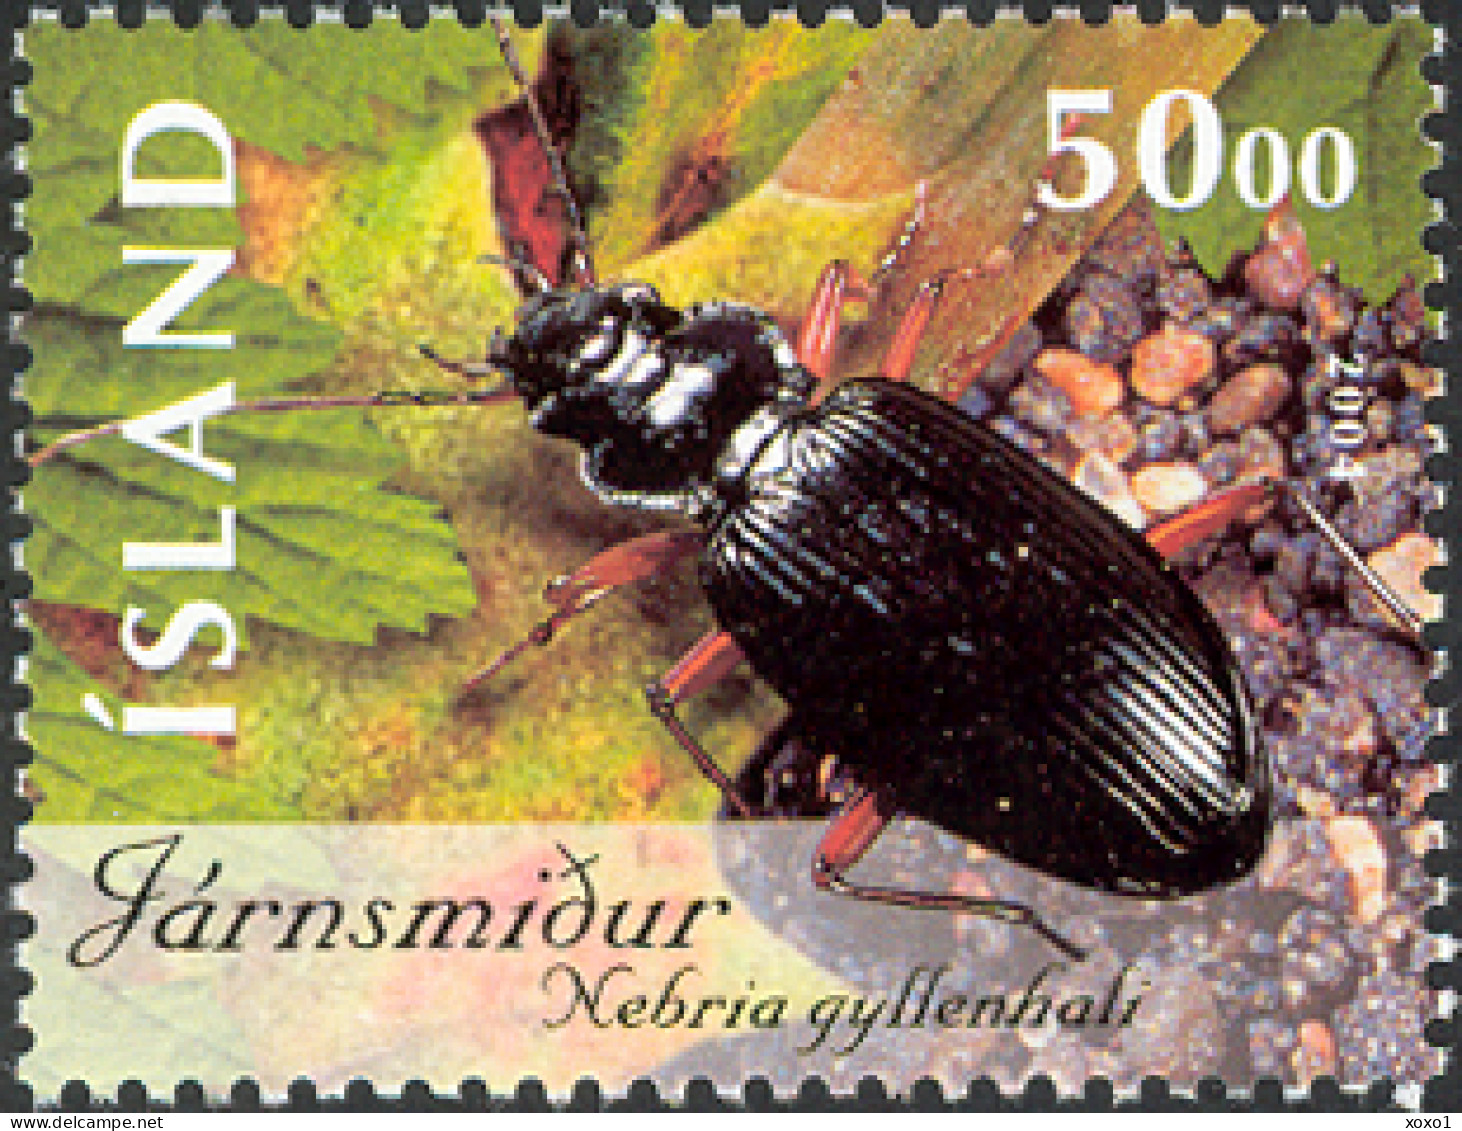 Iceland 2004 MiNr. 1075 - 1076 Island Insects And Spiders  # 1     2v  MNH** 3.50 € - Coléoptères